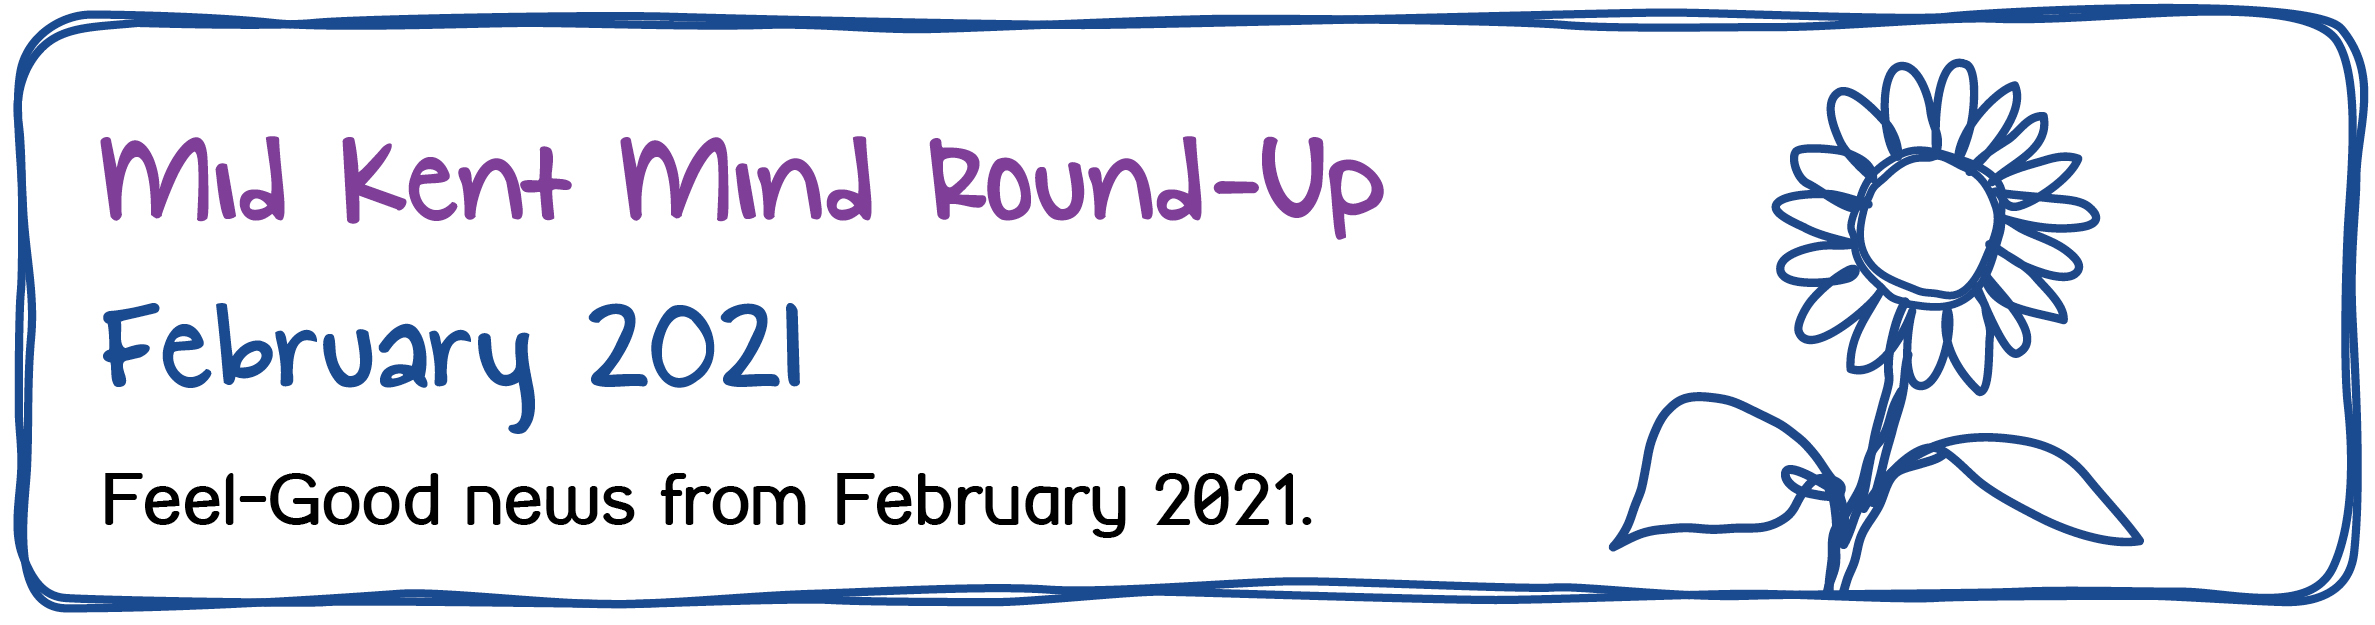 Mid Kent Mind Newsletter - February 2021 - Mid Kent Mind Round-Up. February 2021. Feel-Good news from February 2021.